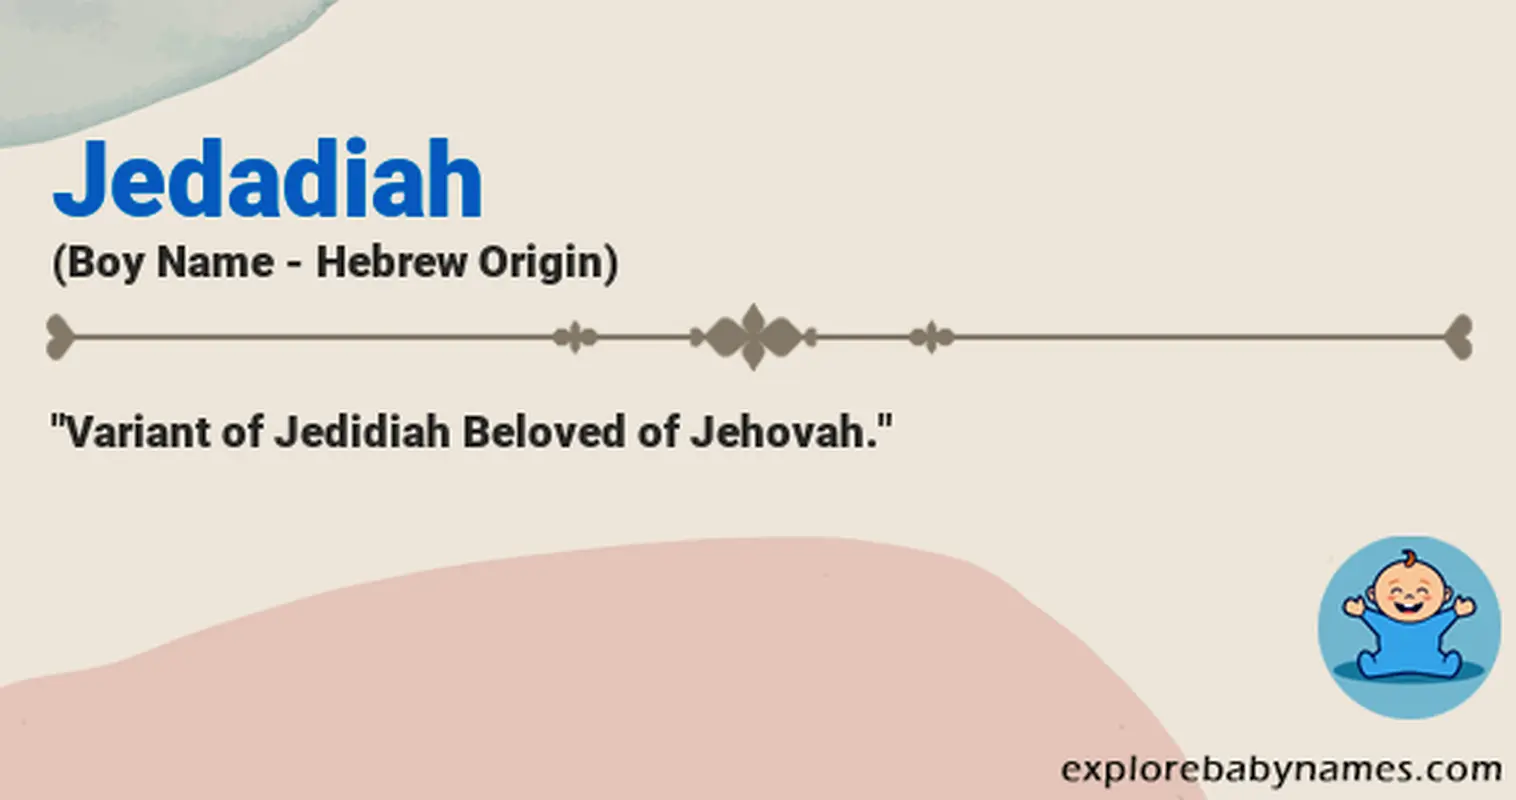 Meaning of Jedadiah